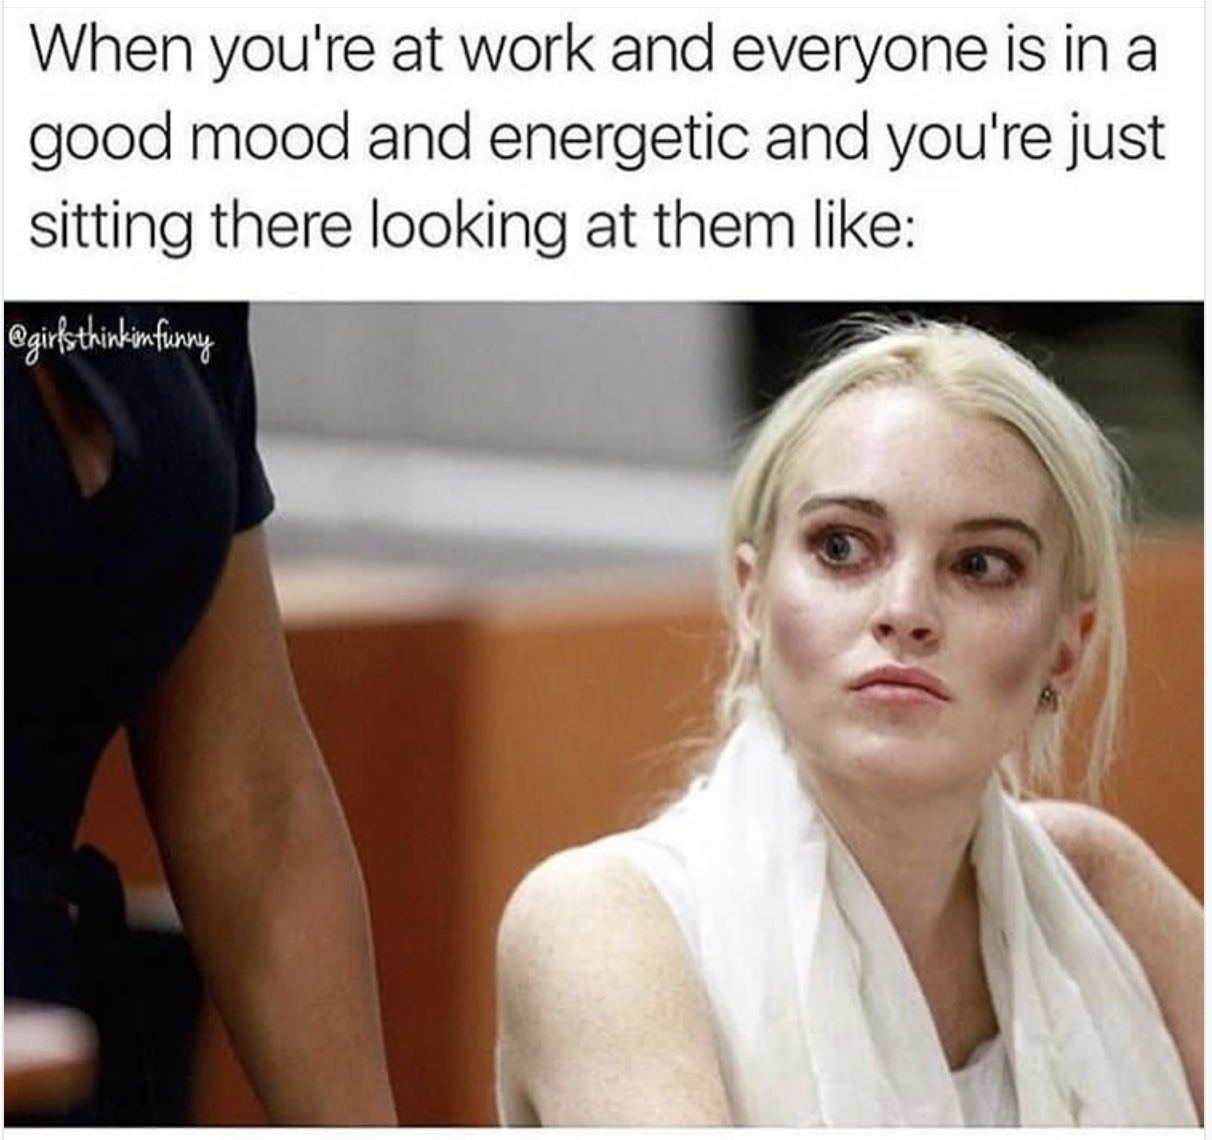 memes - lindsay lohan court - When you're at work and everyone is in a good mood and energetic and you're just sitting there looking at them thinkimfunny